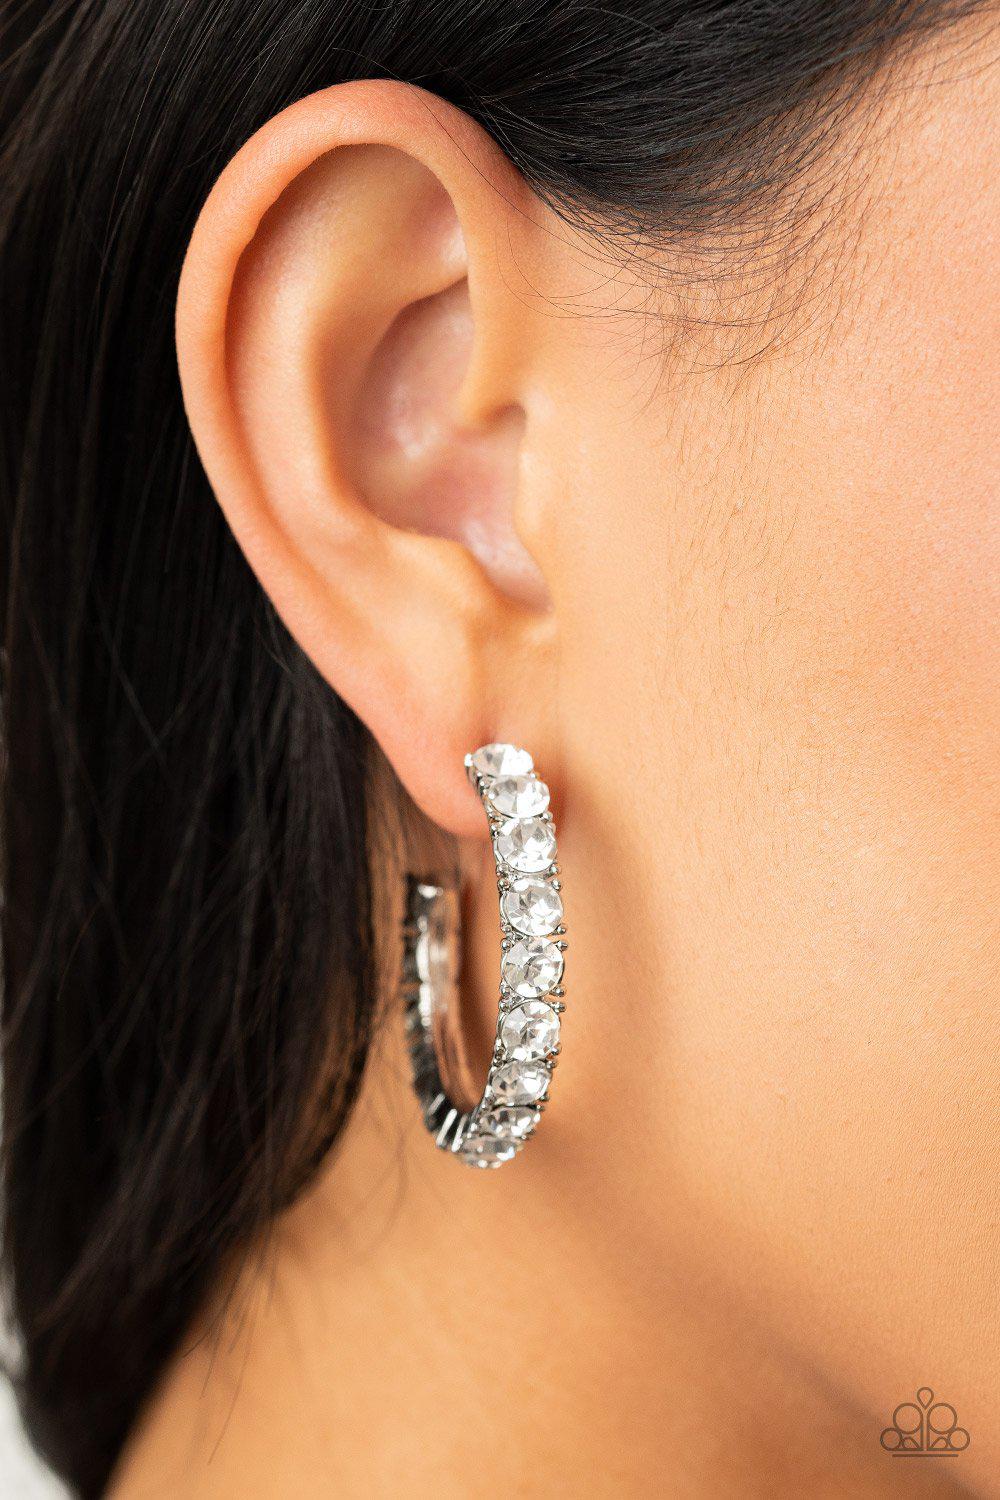 CLASSY is in Session White Rhinestone Hoop Earrings - Paparazzi Accessories - model -CarasShop.com - $5 Jewelry by Cara Jewels